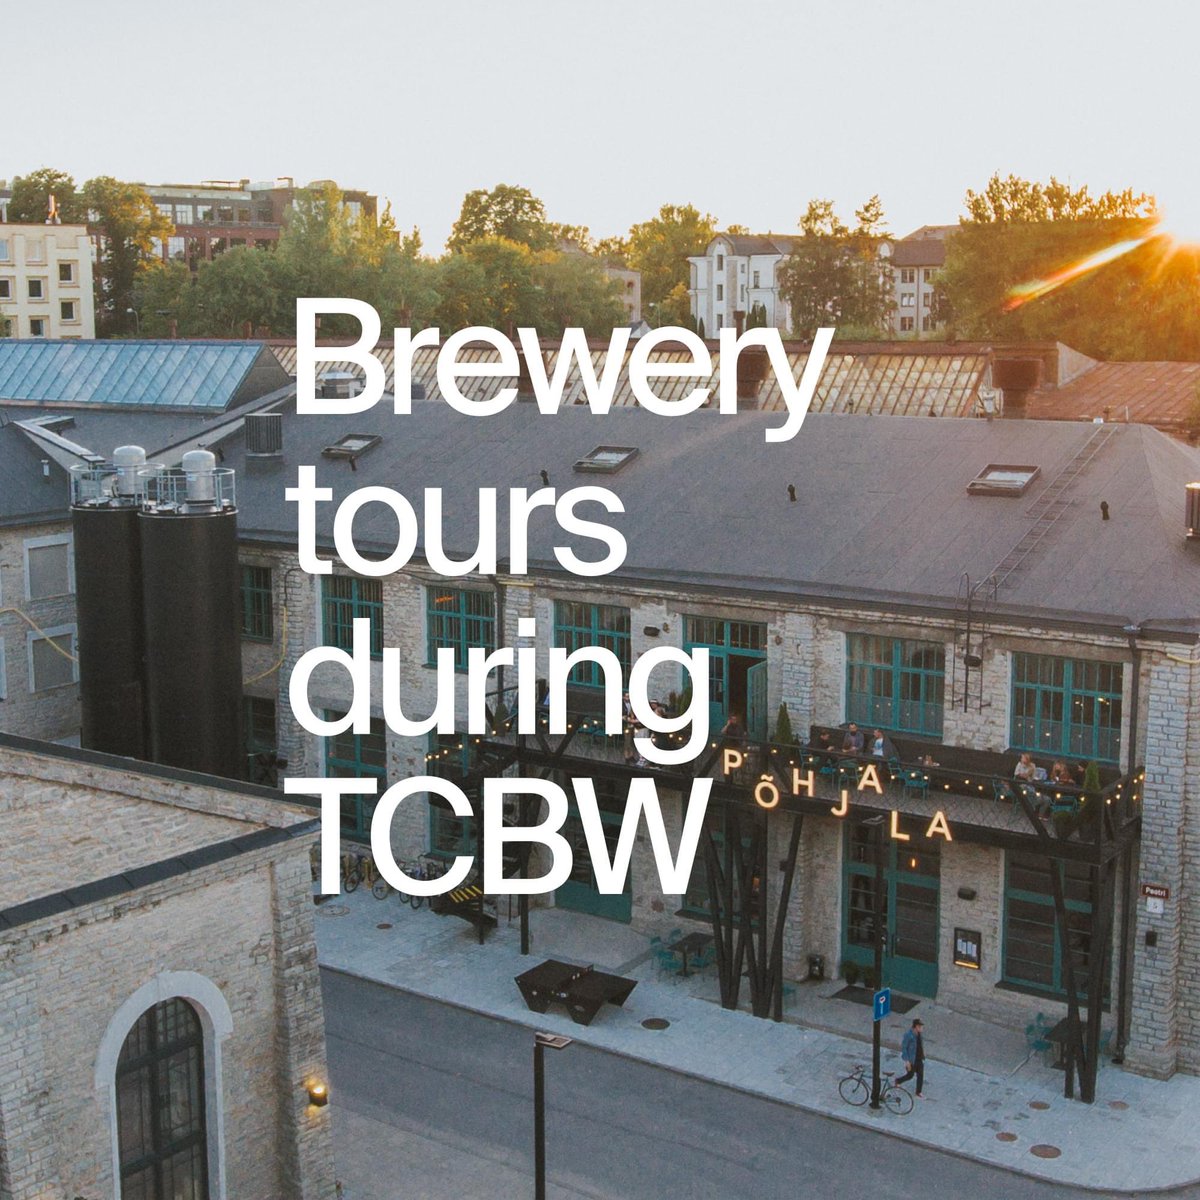 If you’re in town for TCBW on May 5—6 and want to also take part of Põhjala Brewery tour, you’re welcome to join us on both days: 12/13/14:00 ENG Pre-registration needed via 💌 shop@pohjalabeer.com Tour takes around 45—60min, costs 14€/person and includes tasting of 3 beers.